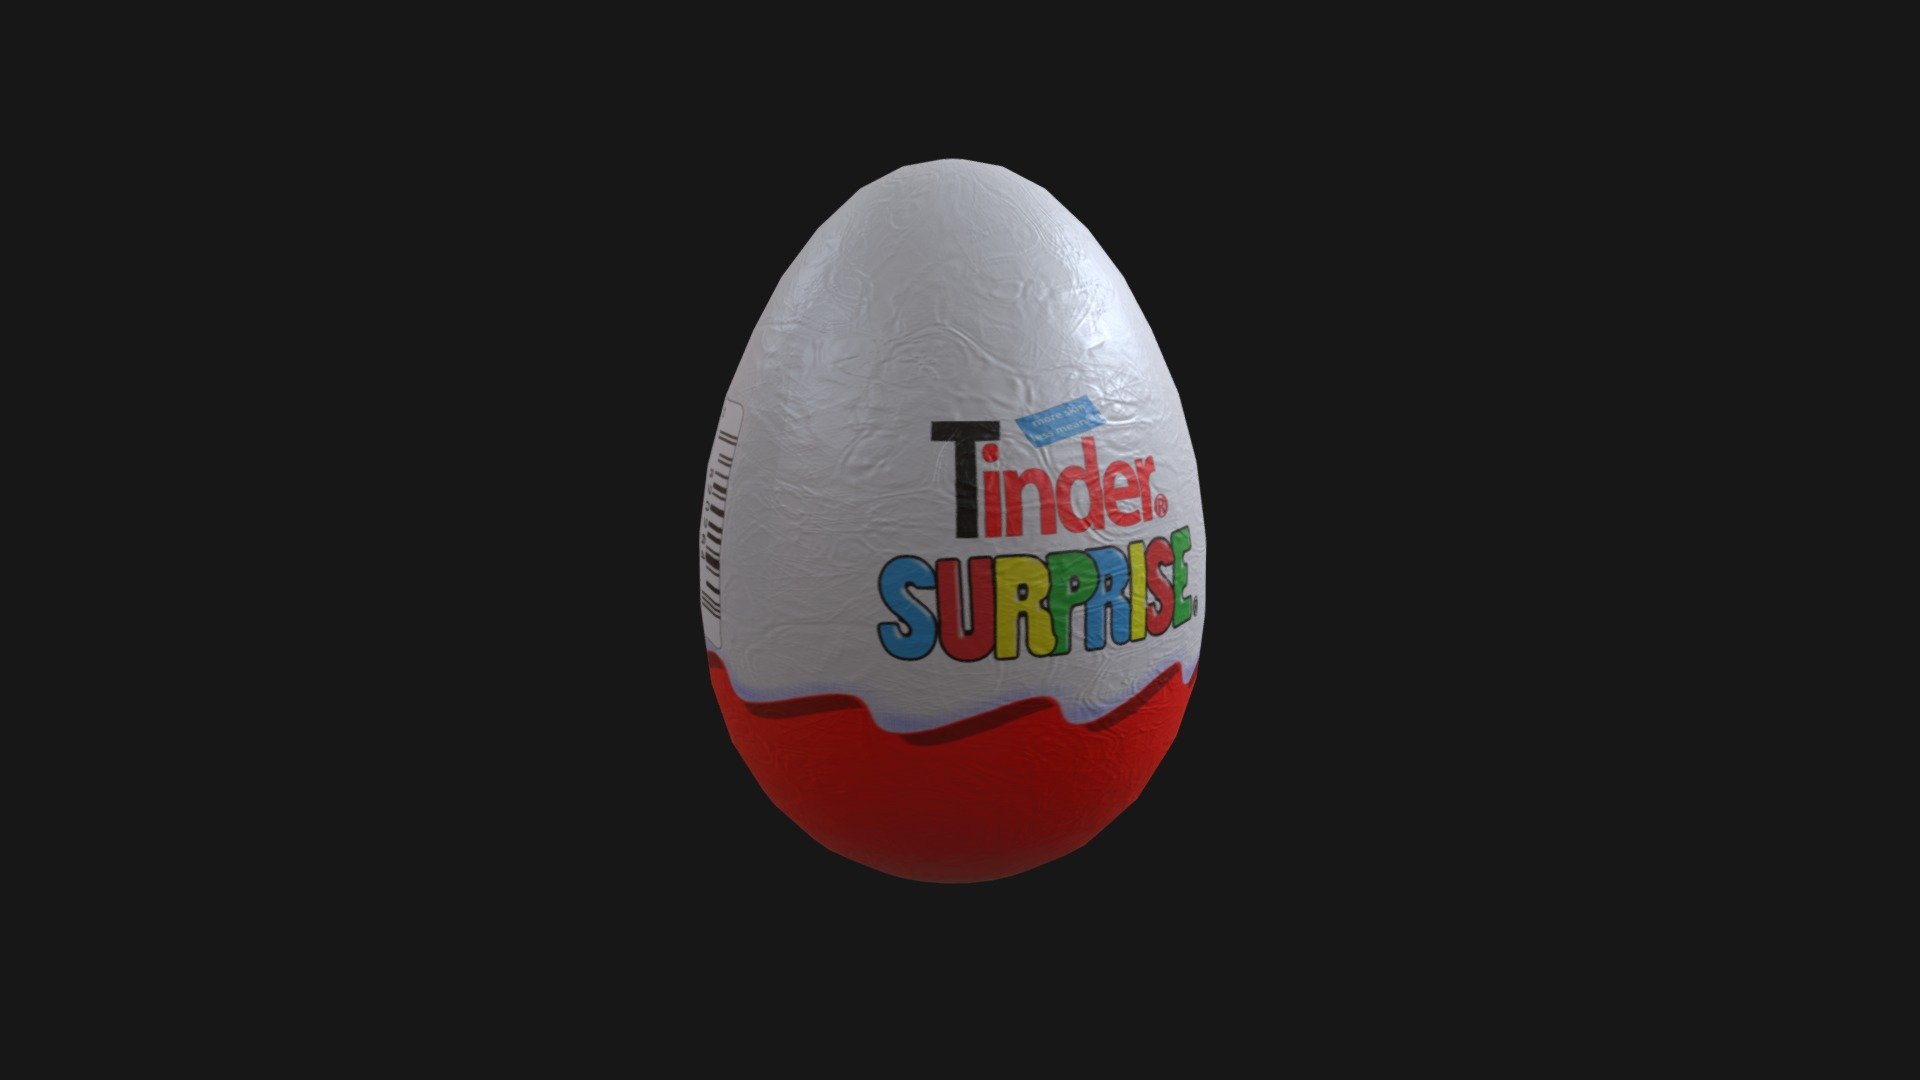 Fun project on substance designer. Gave me the giggles while making it.
For more info, criticism, help, model requests, opportunities or anything else please contact me at lazarosinep@hotmail.com - Tinder egg surprise (may contain nuts) - 3D model by Lazaros Inepologlou (@larry_3d) 3d model